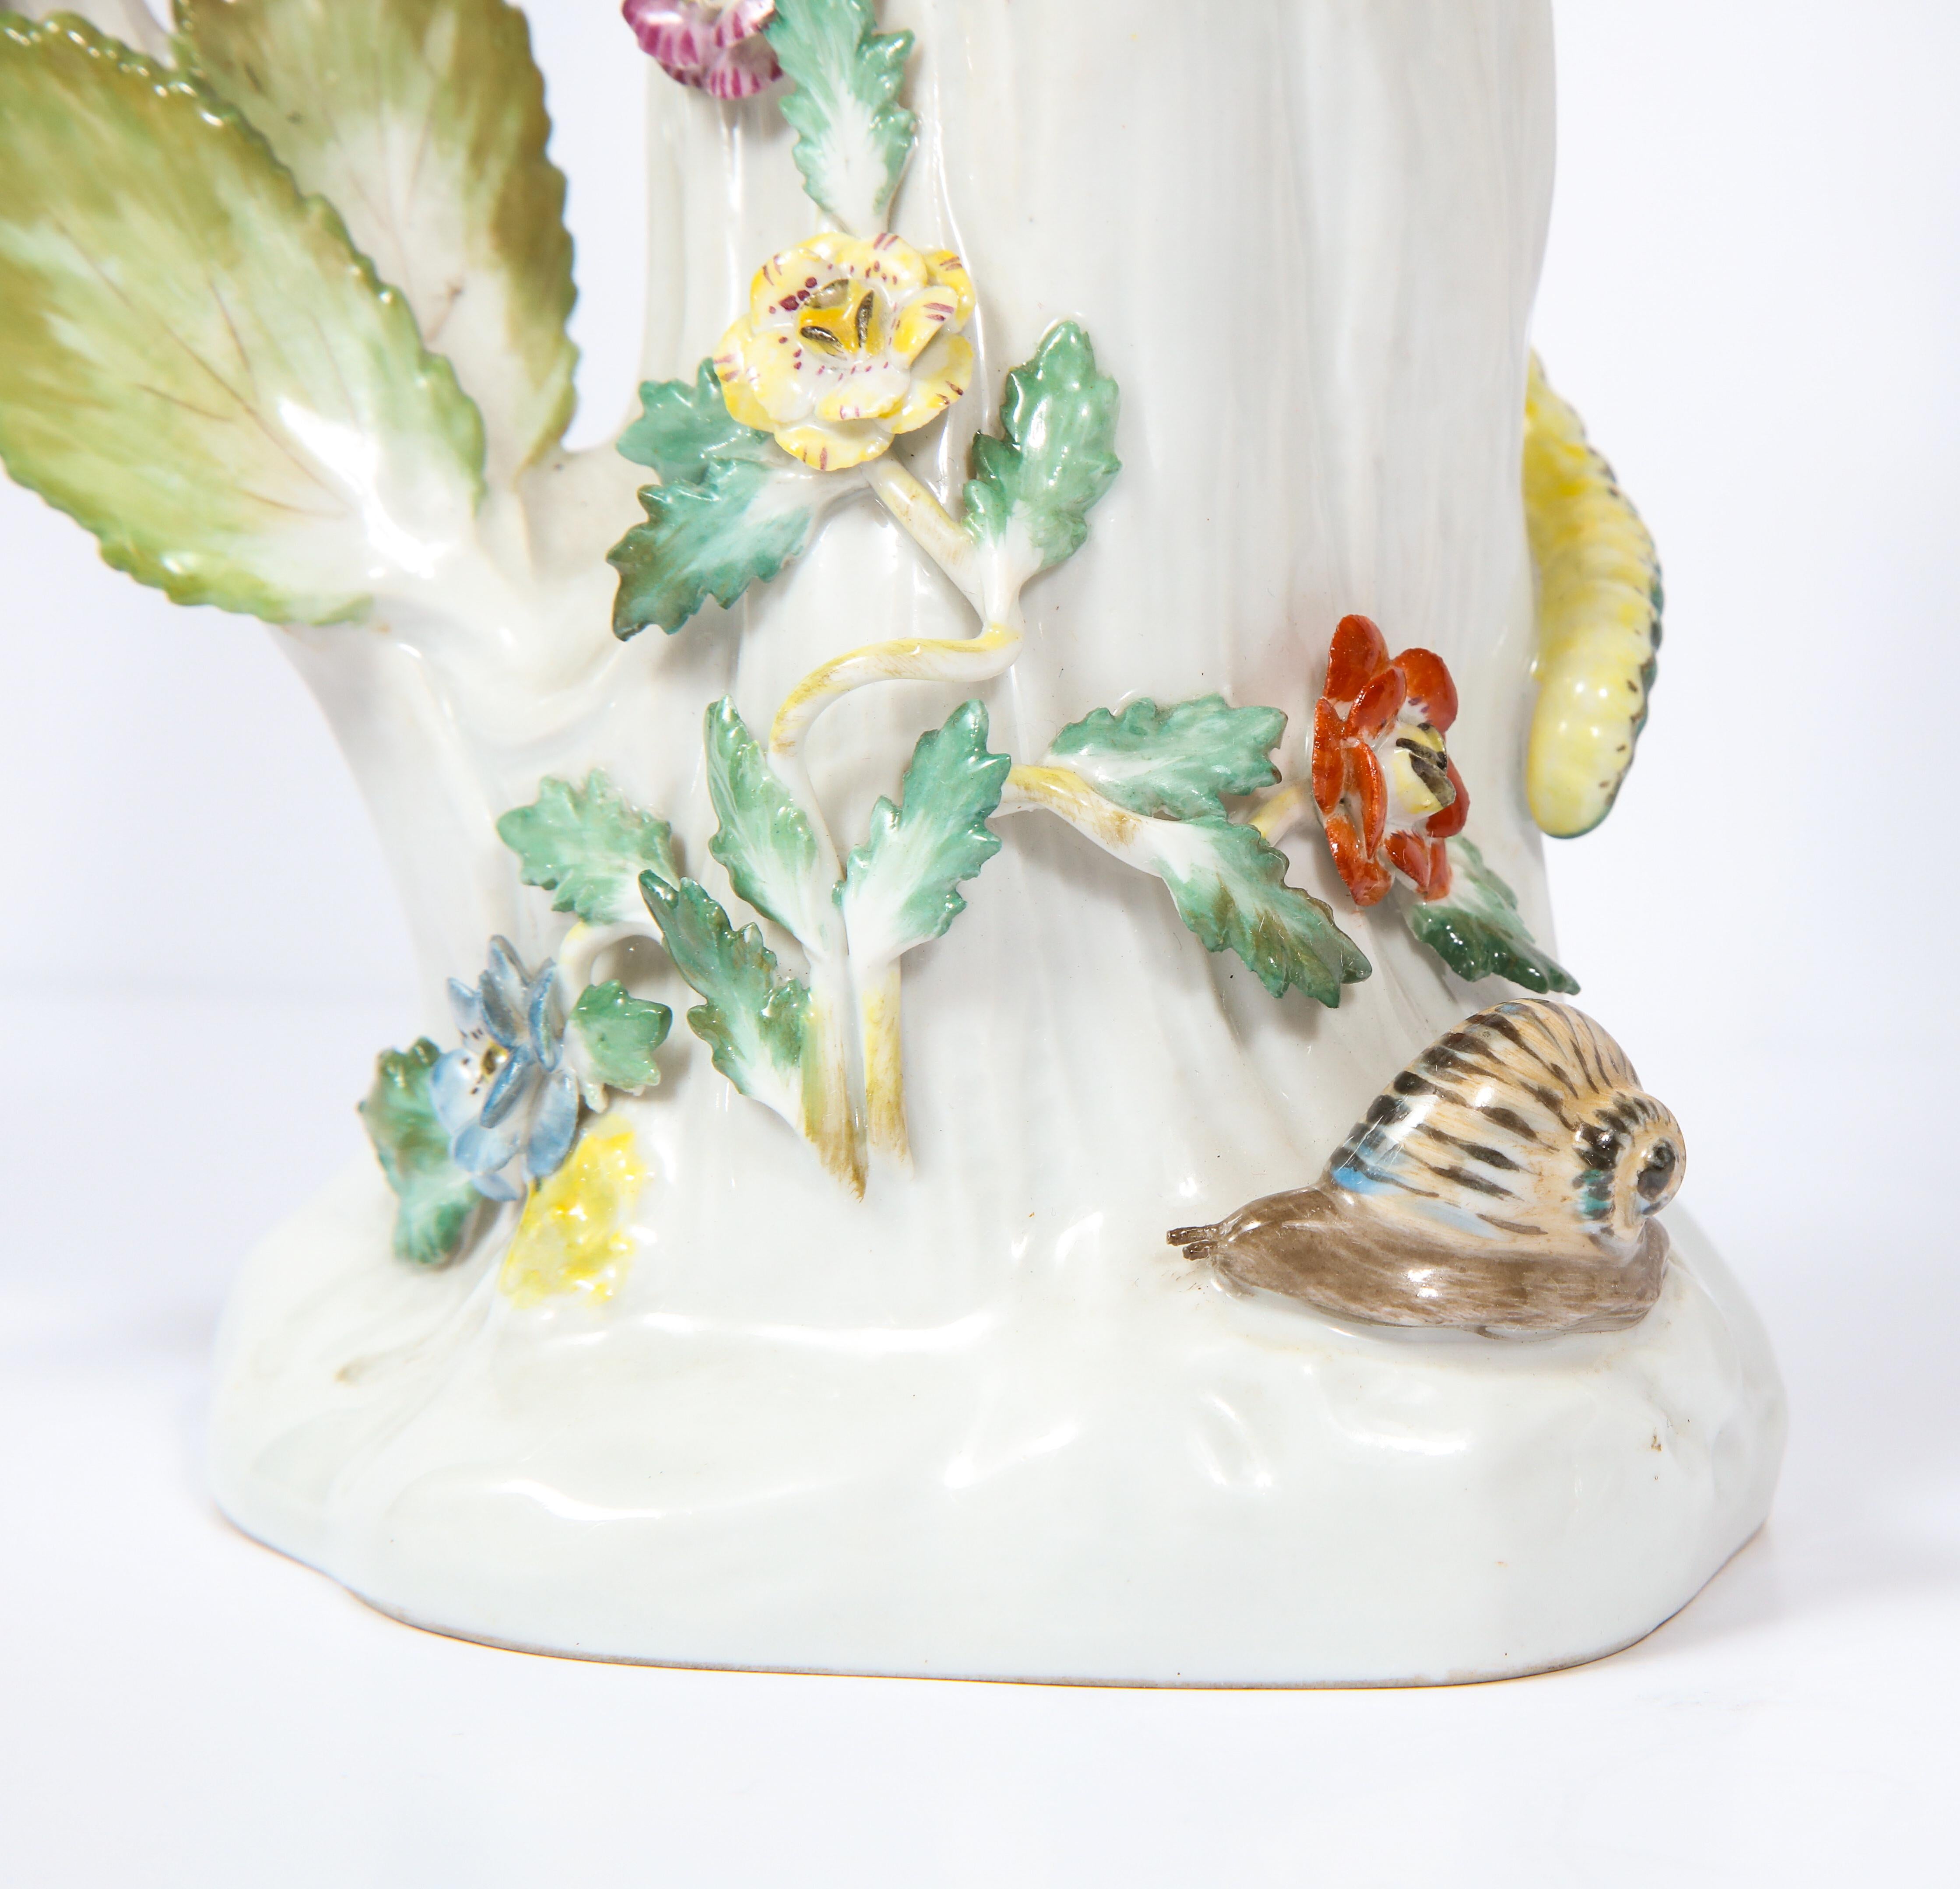 Pair of Meissen Porcelain Figures of Parrots with Cherries, Insects and Flowers 9